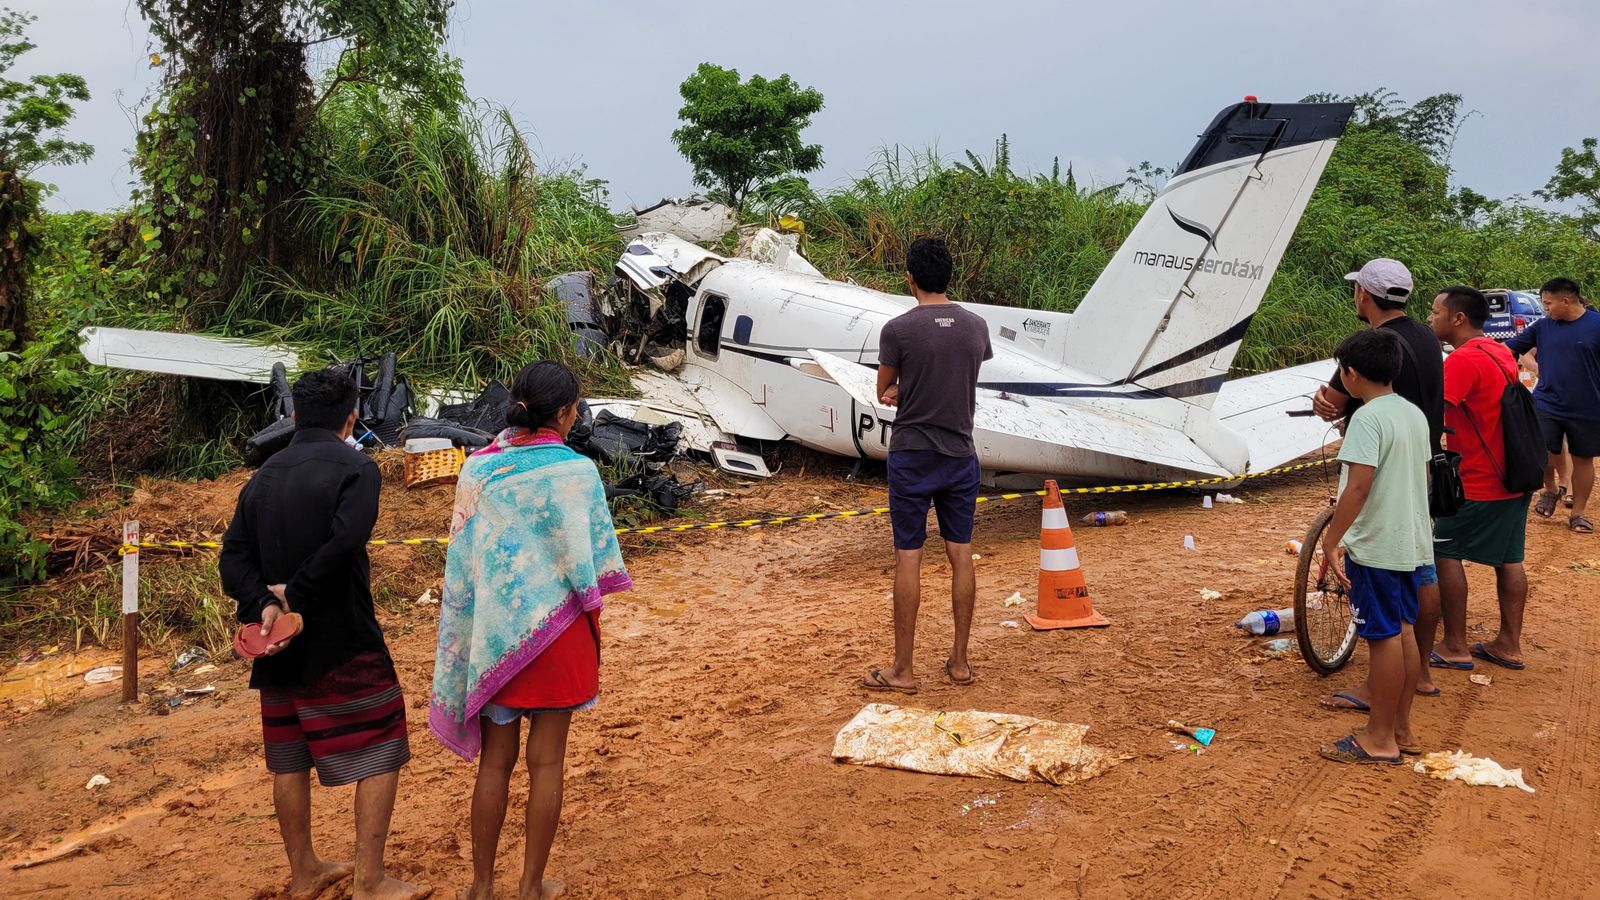 Brazil plane crash: 14 dead after aircraft carrying tourists crashes in Amazon rainforest